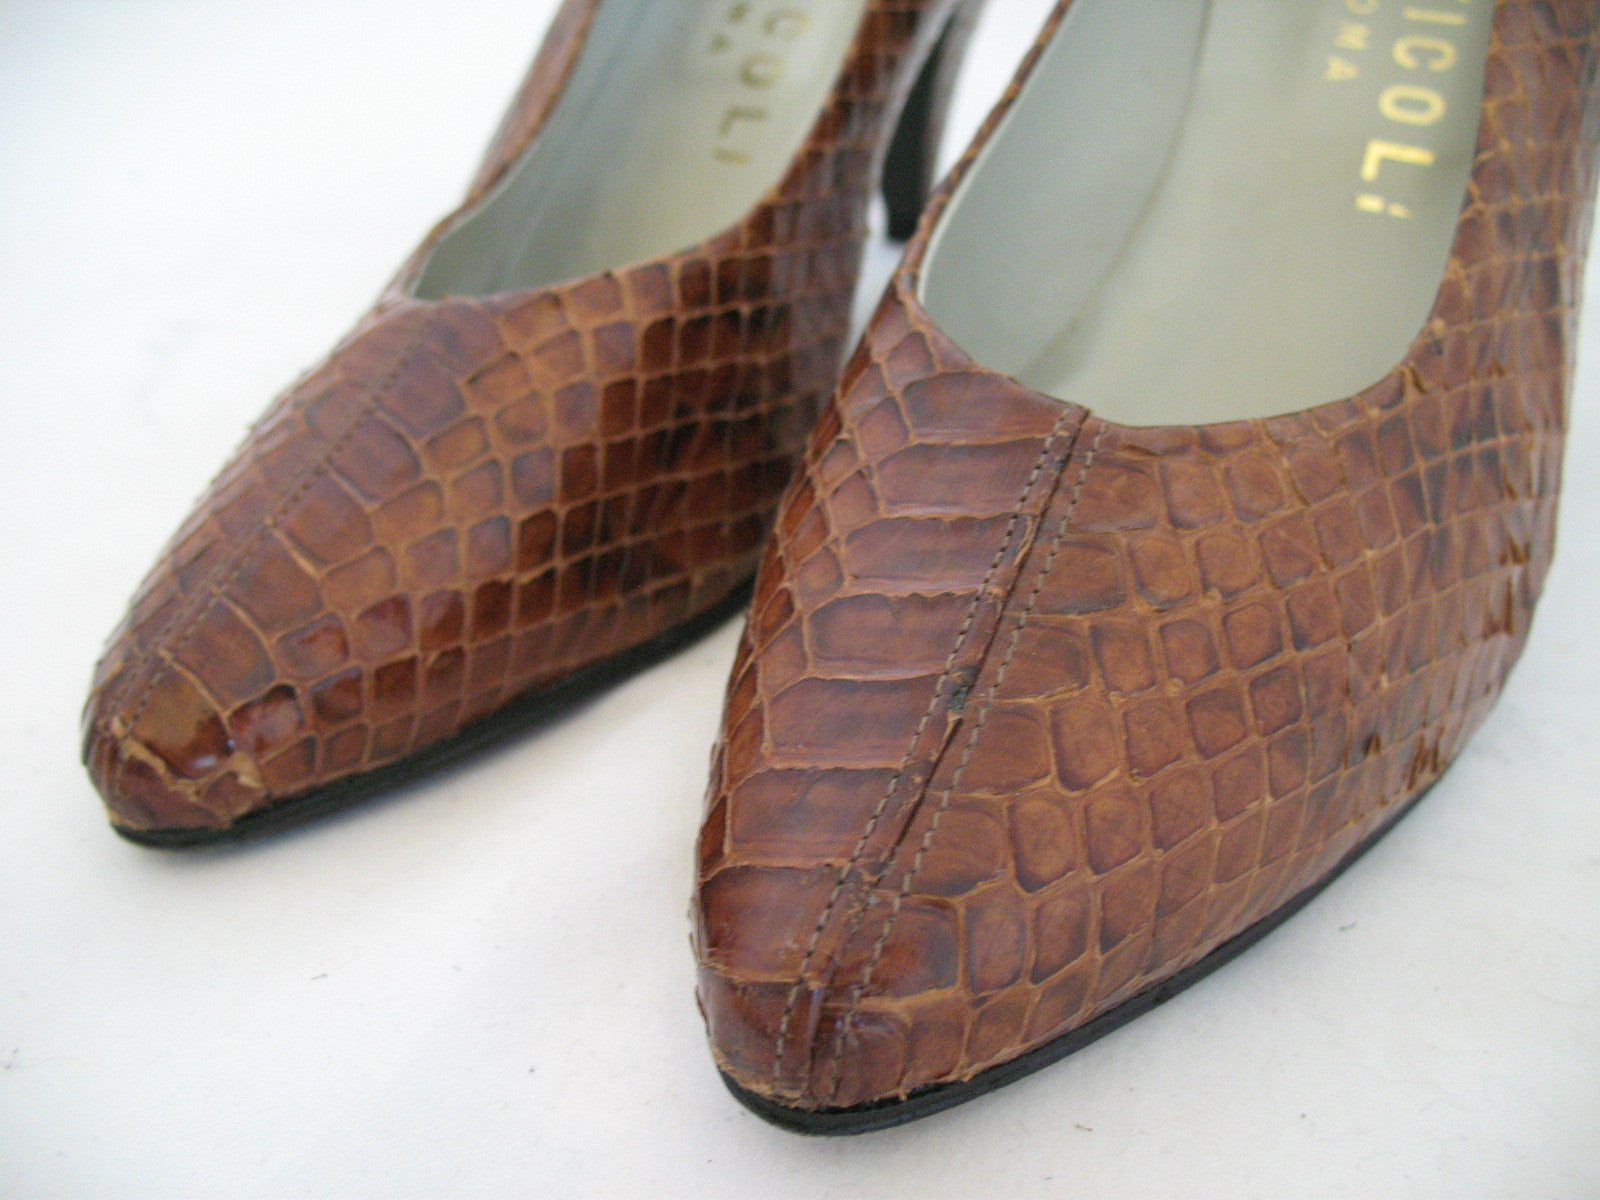 shoes made from animal skin